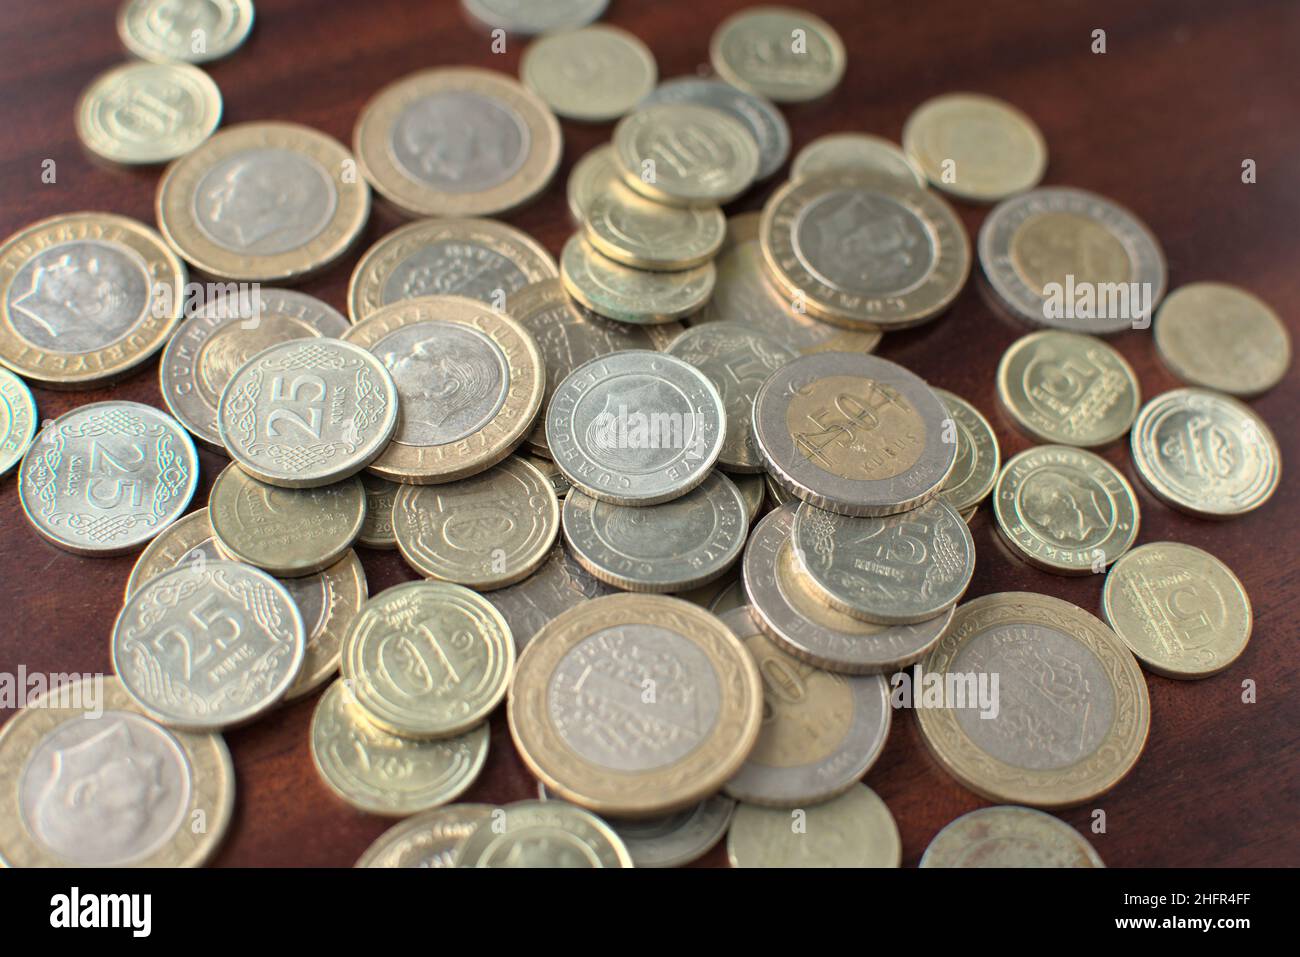 Some Turkish coins mixed on brown background. Some Turkish Liras on a brown table. Full of pocket of coins. Stock Photo